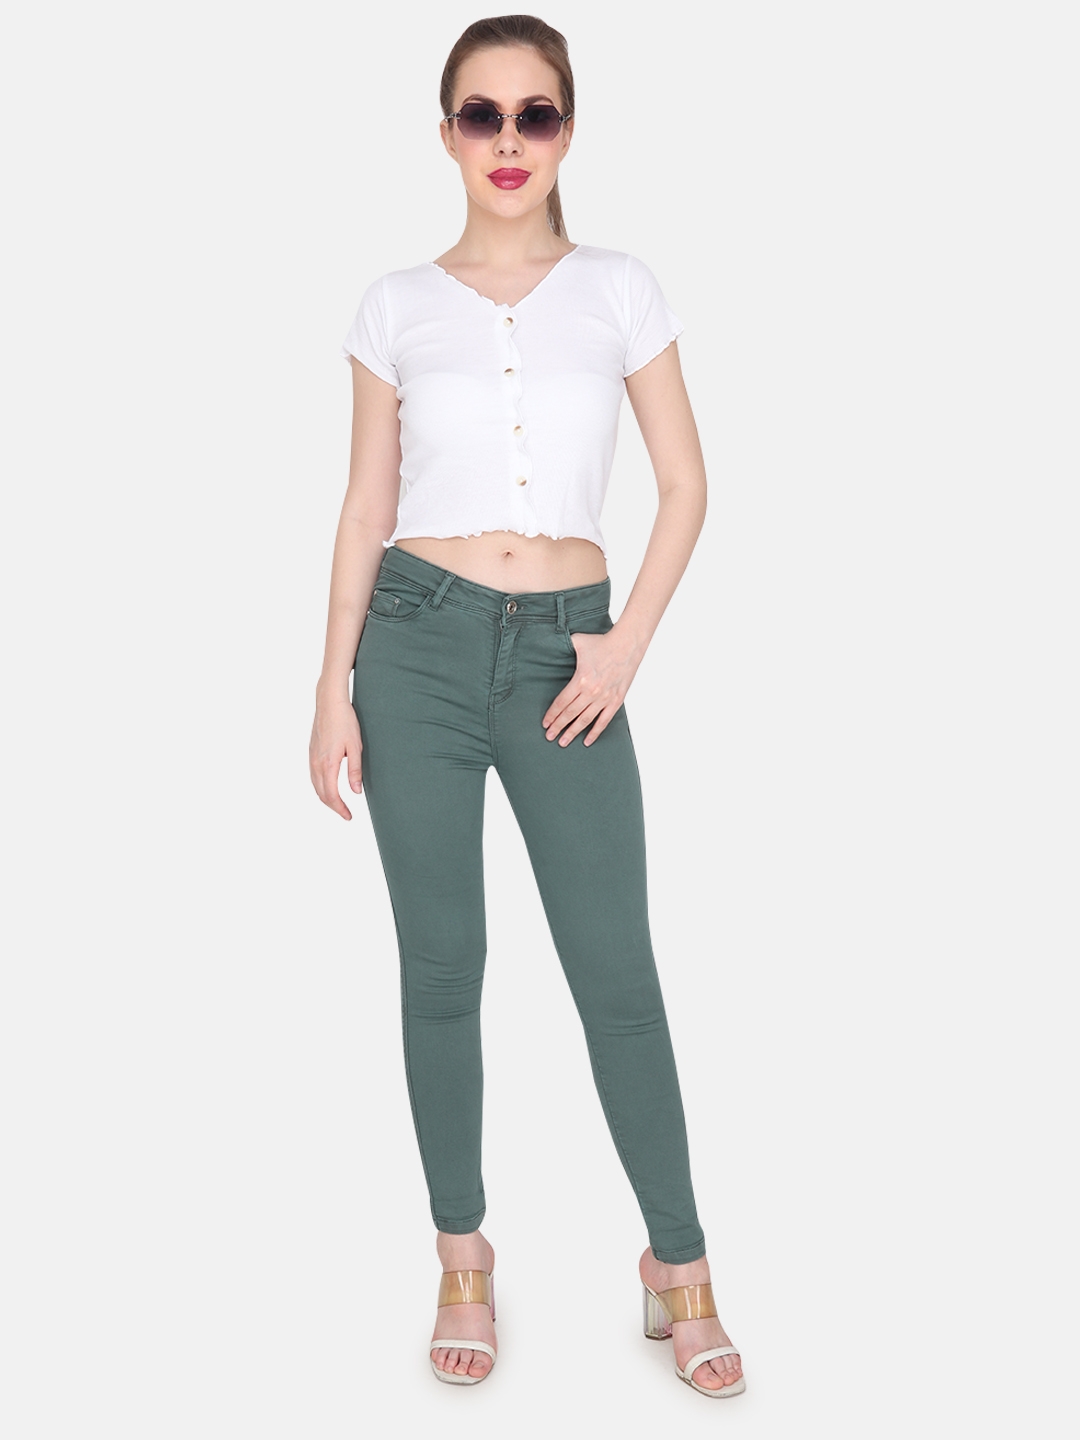 Albion | Albion By CnM Women Green Denim Stretchable Jeans 5